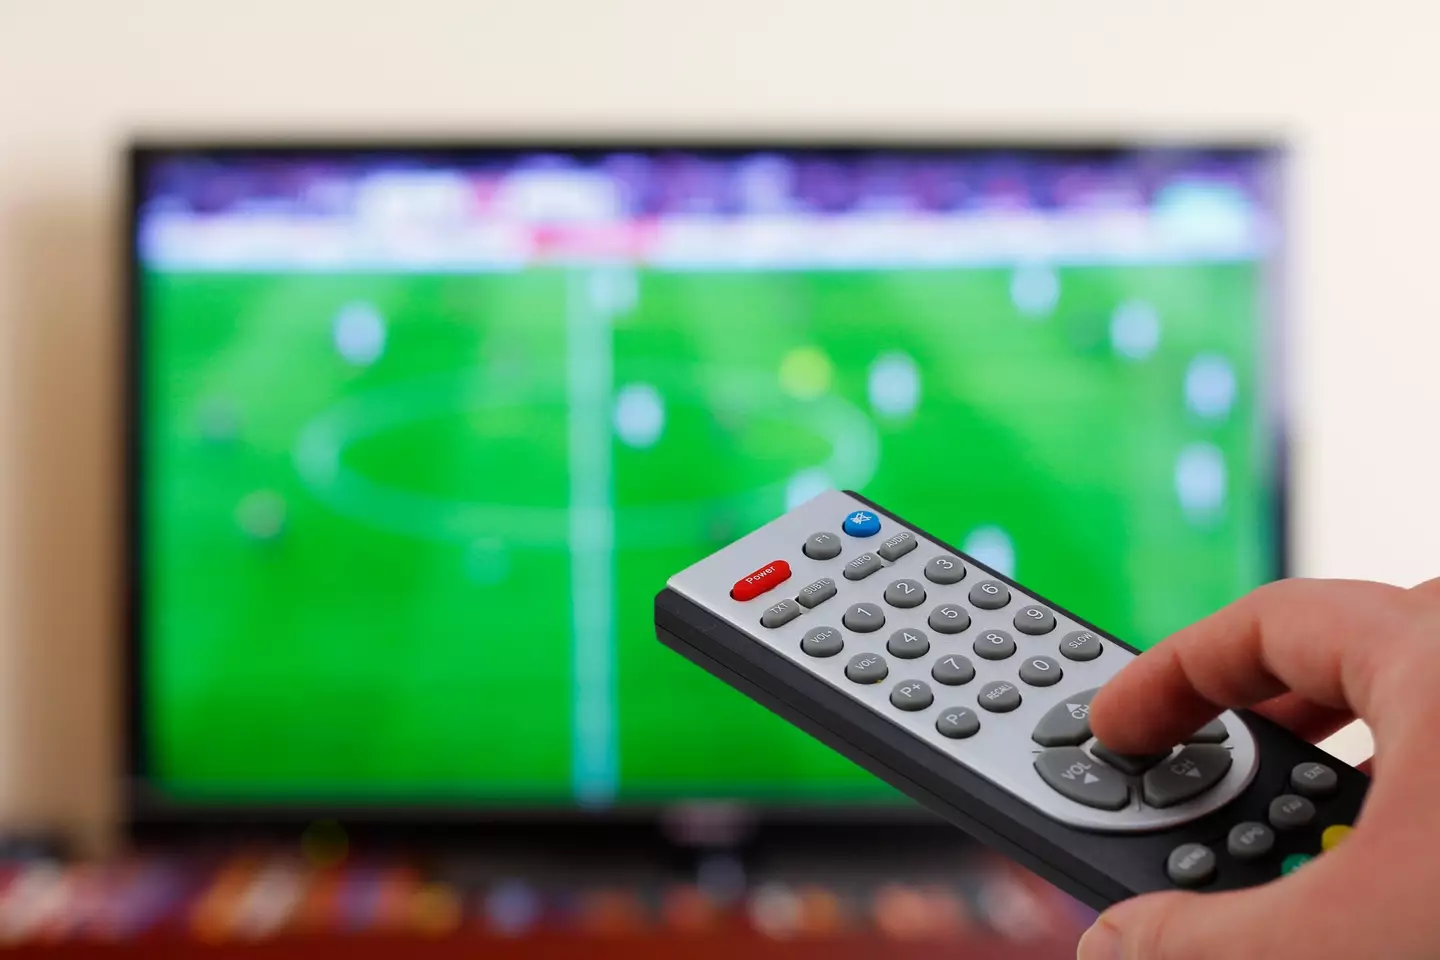 IPTV devices allow people to access premium content like live sports events.